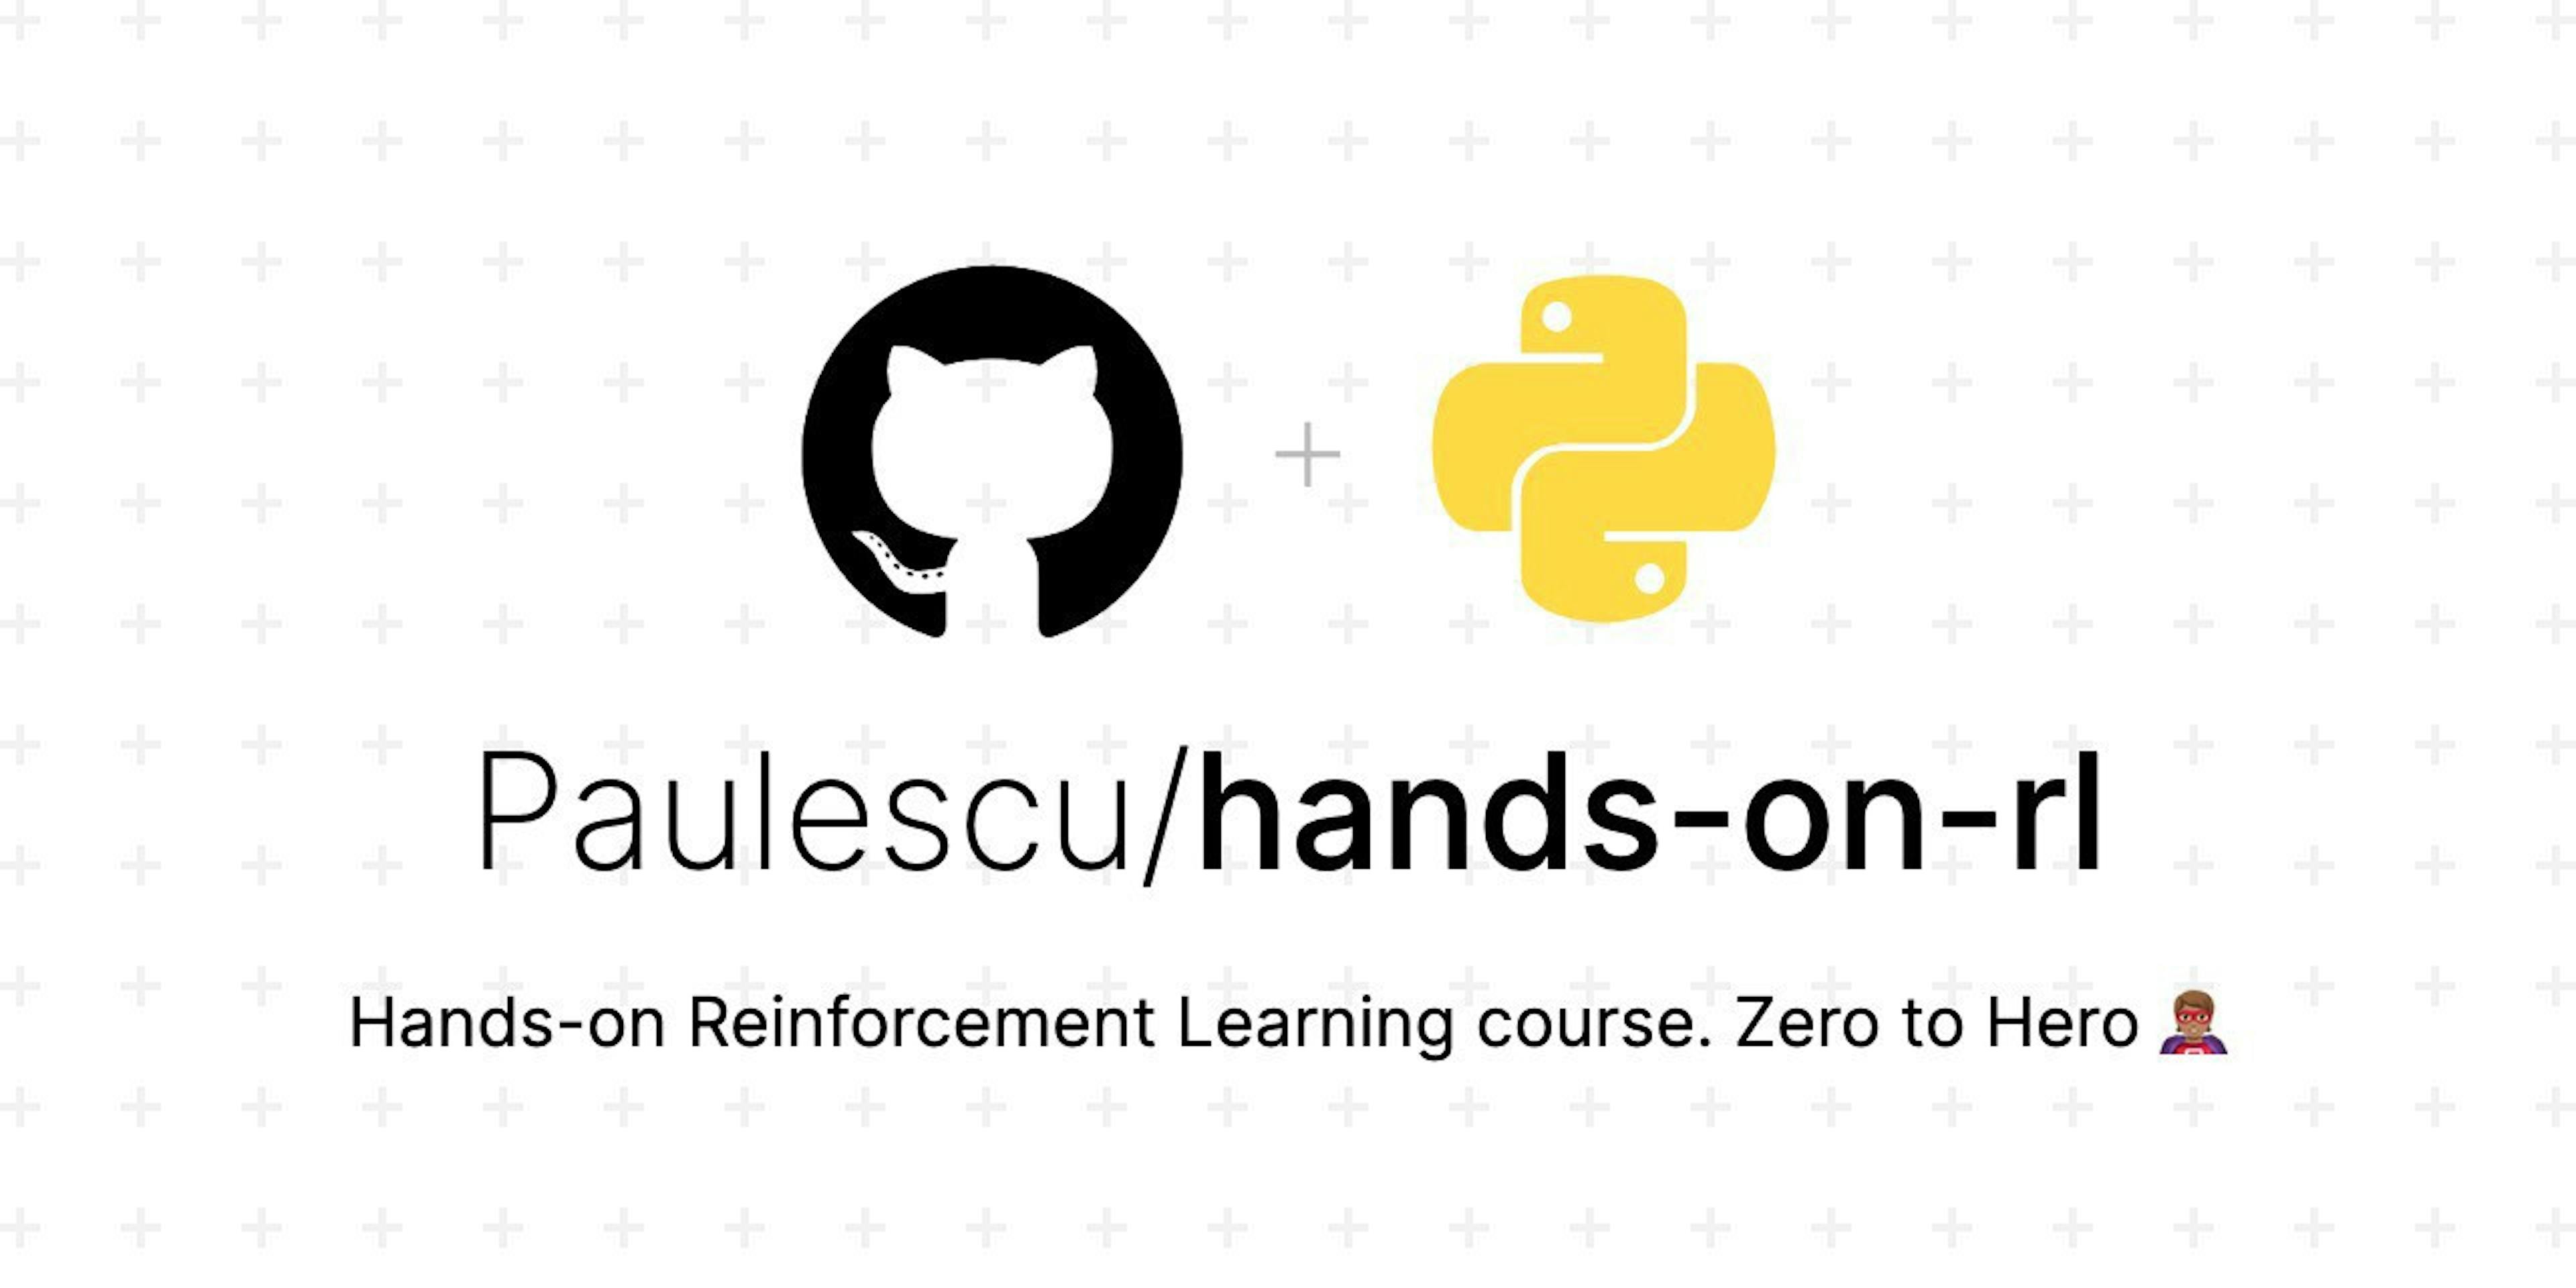 The Hands-on RL course Github repo